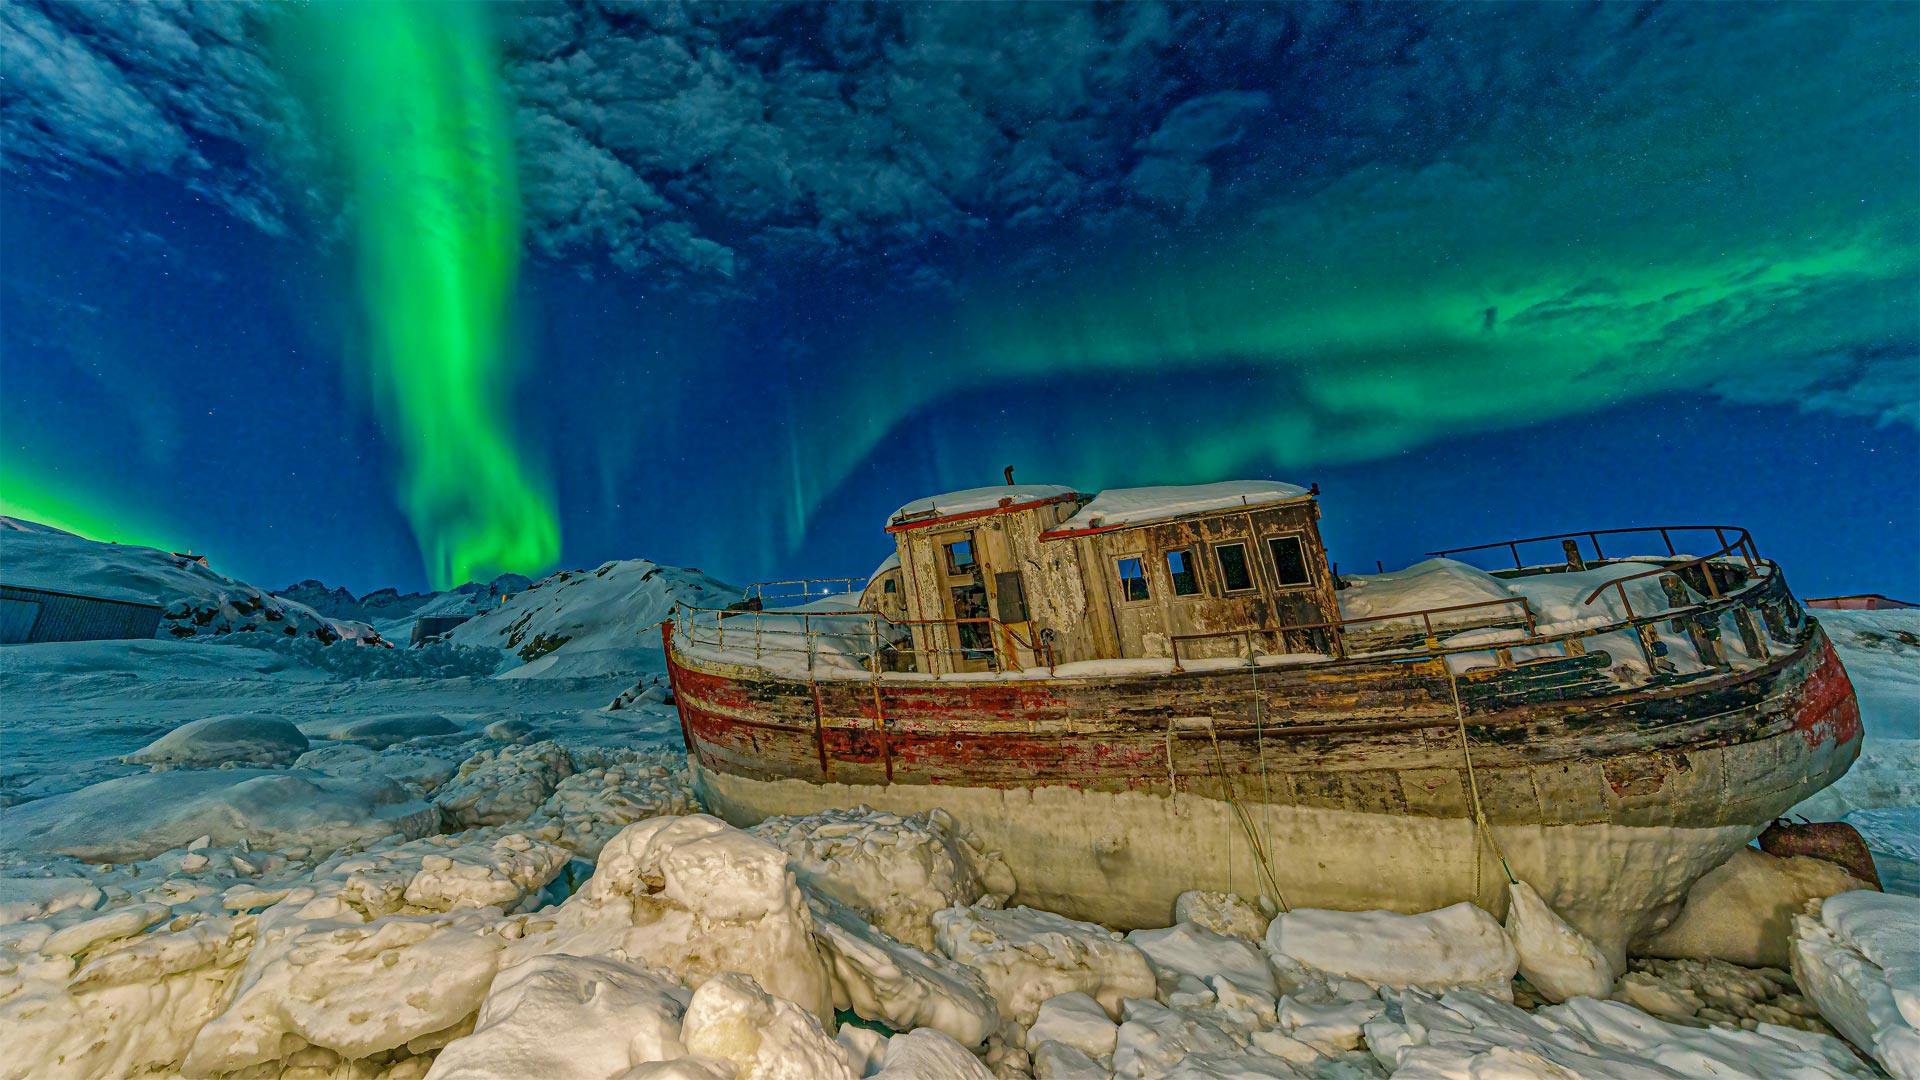 Northern lights over a stranded boat in Tasiilaq, Greenland - Shane P. White